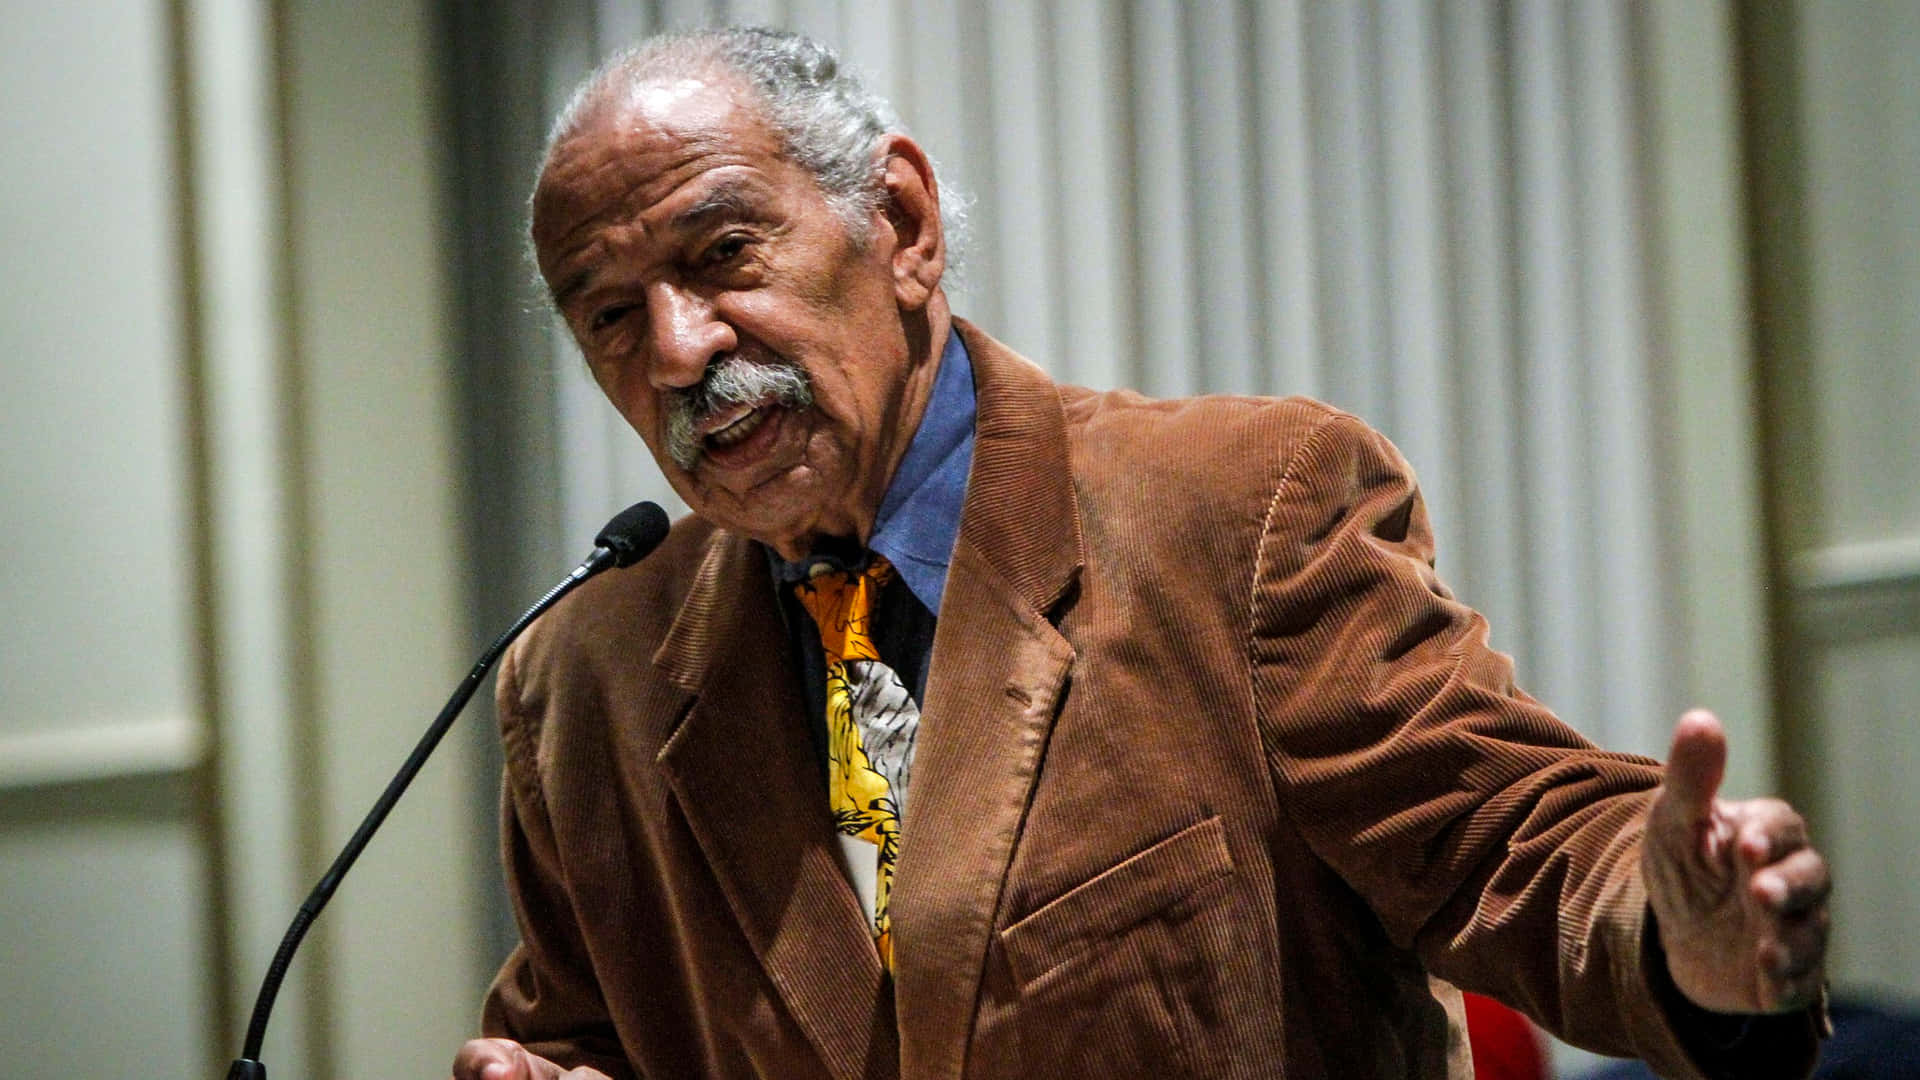 Caption: John Conyers Delivering A Speech Wallpaper